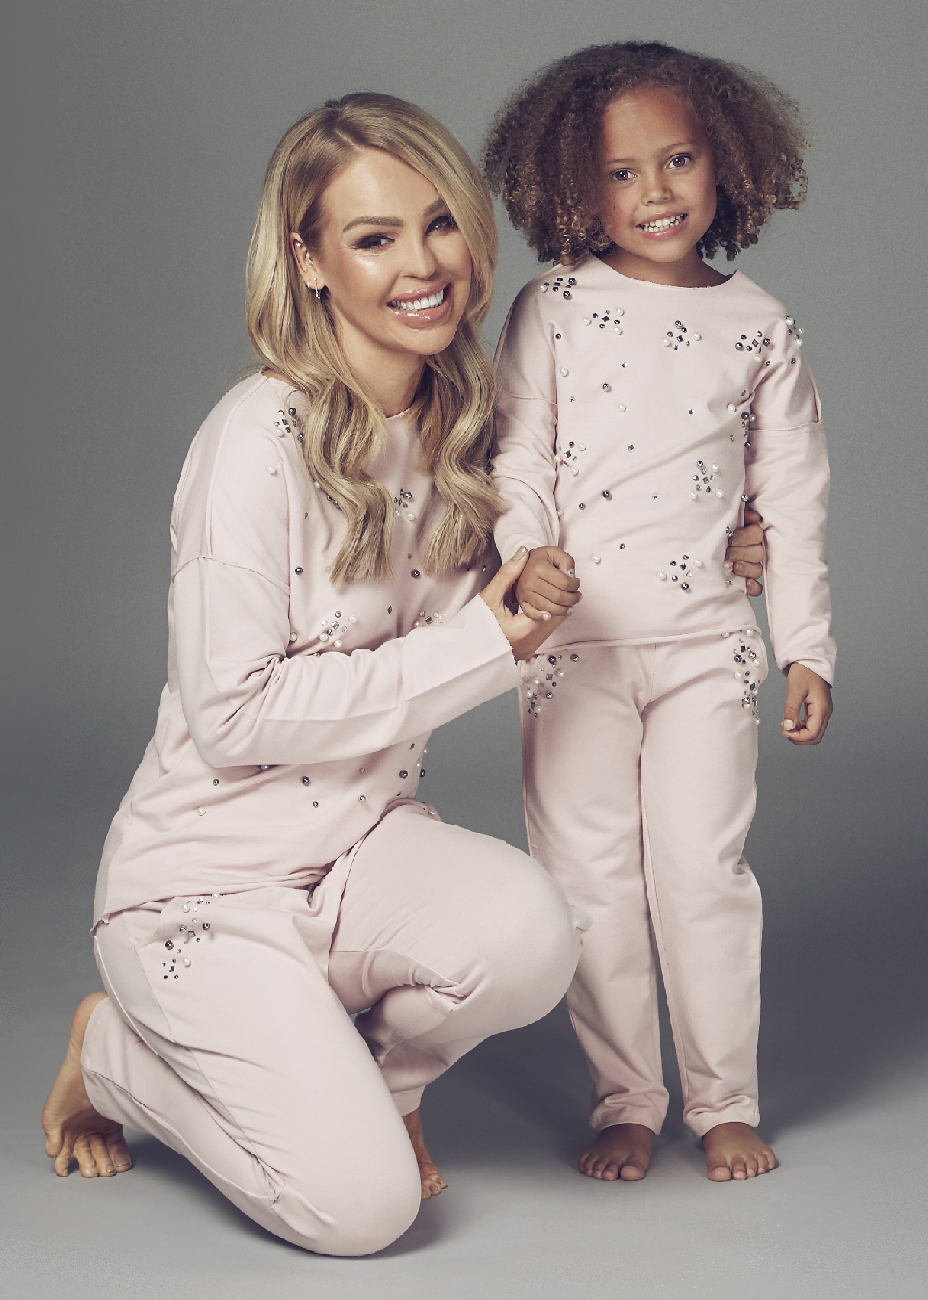 Katie Piper launches 'Mummy and Me' collection with Want That